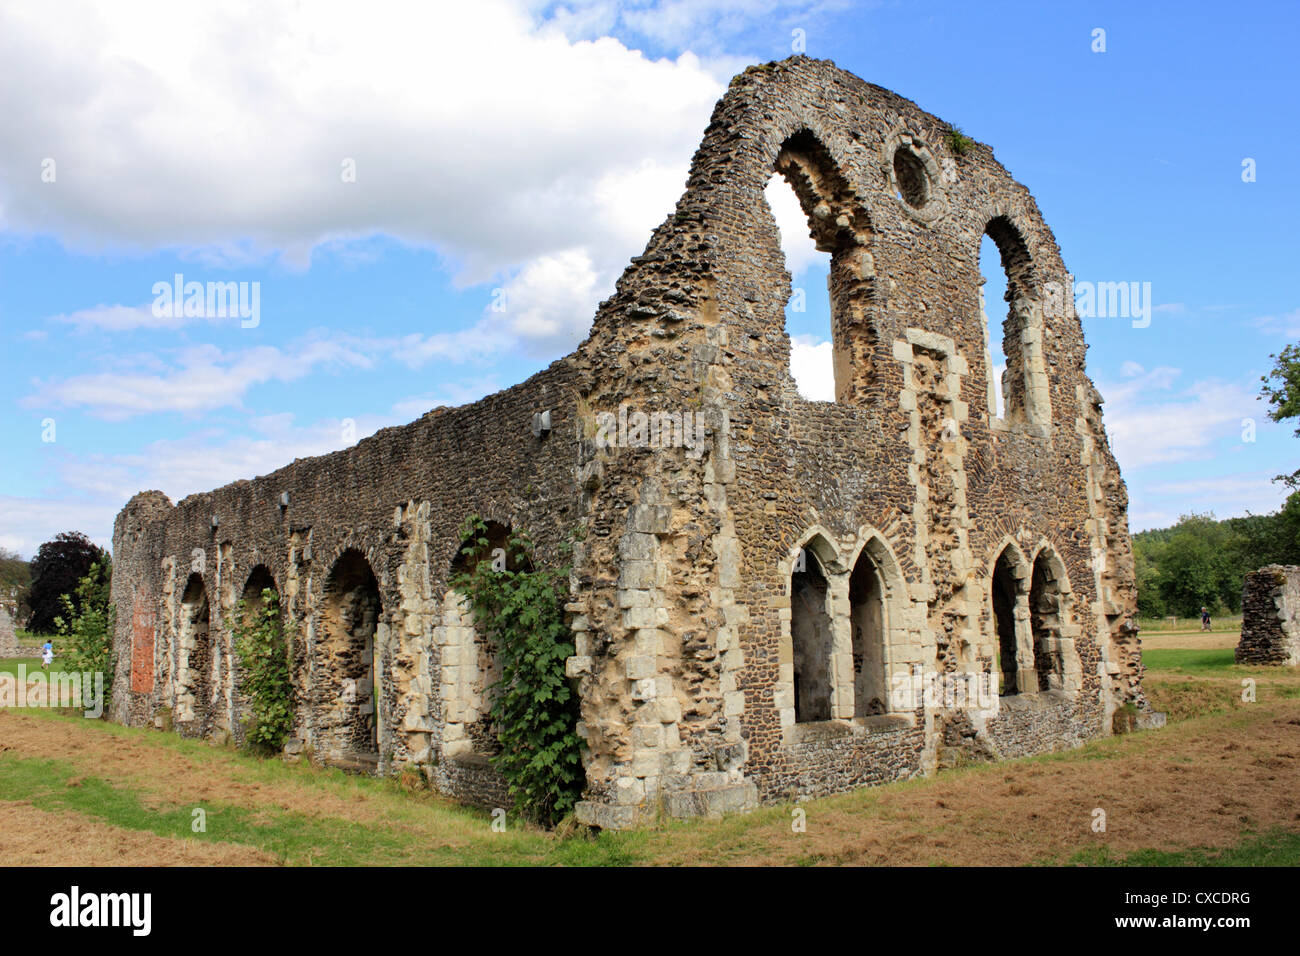 Waverley Abbey was the first Cistercian abbey in England built in 1128 near Farnham, Surrey, on the River Wey. Stock Photo